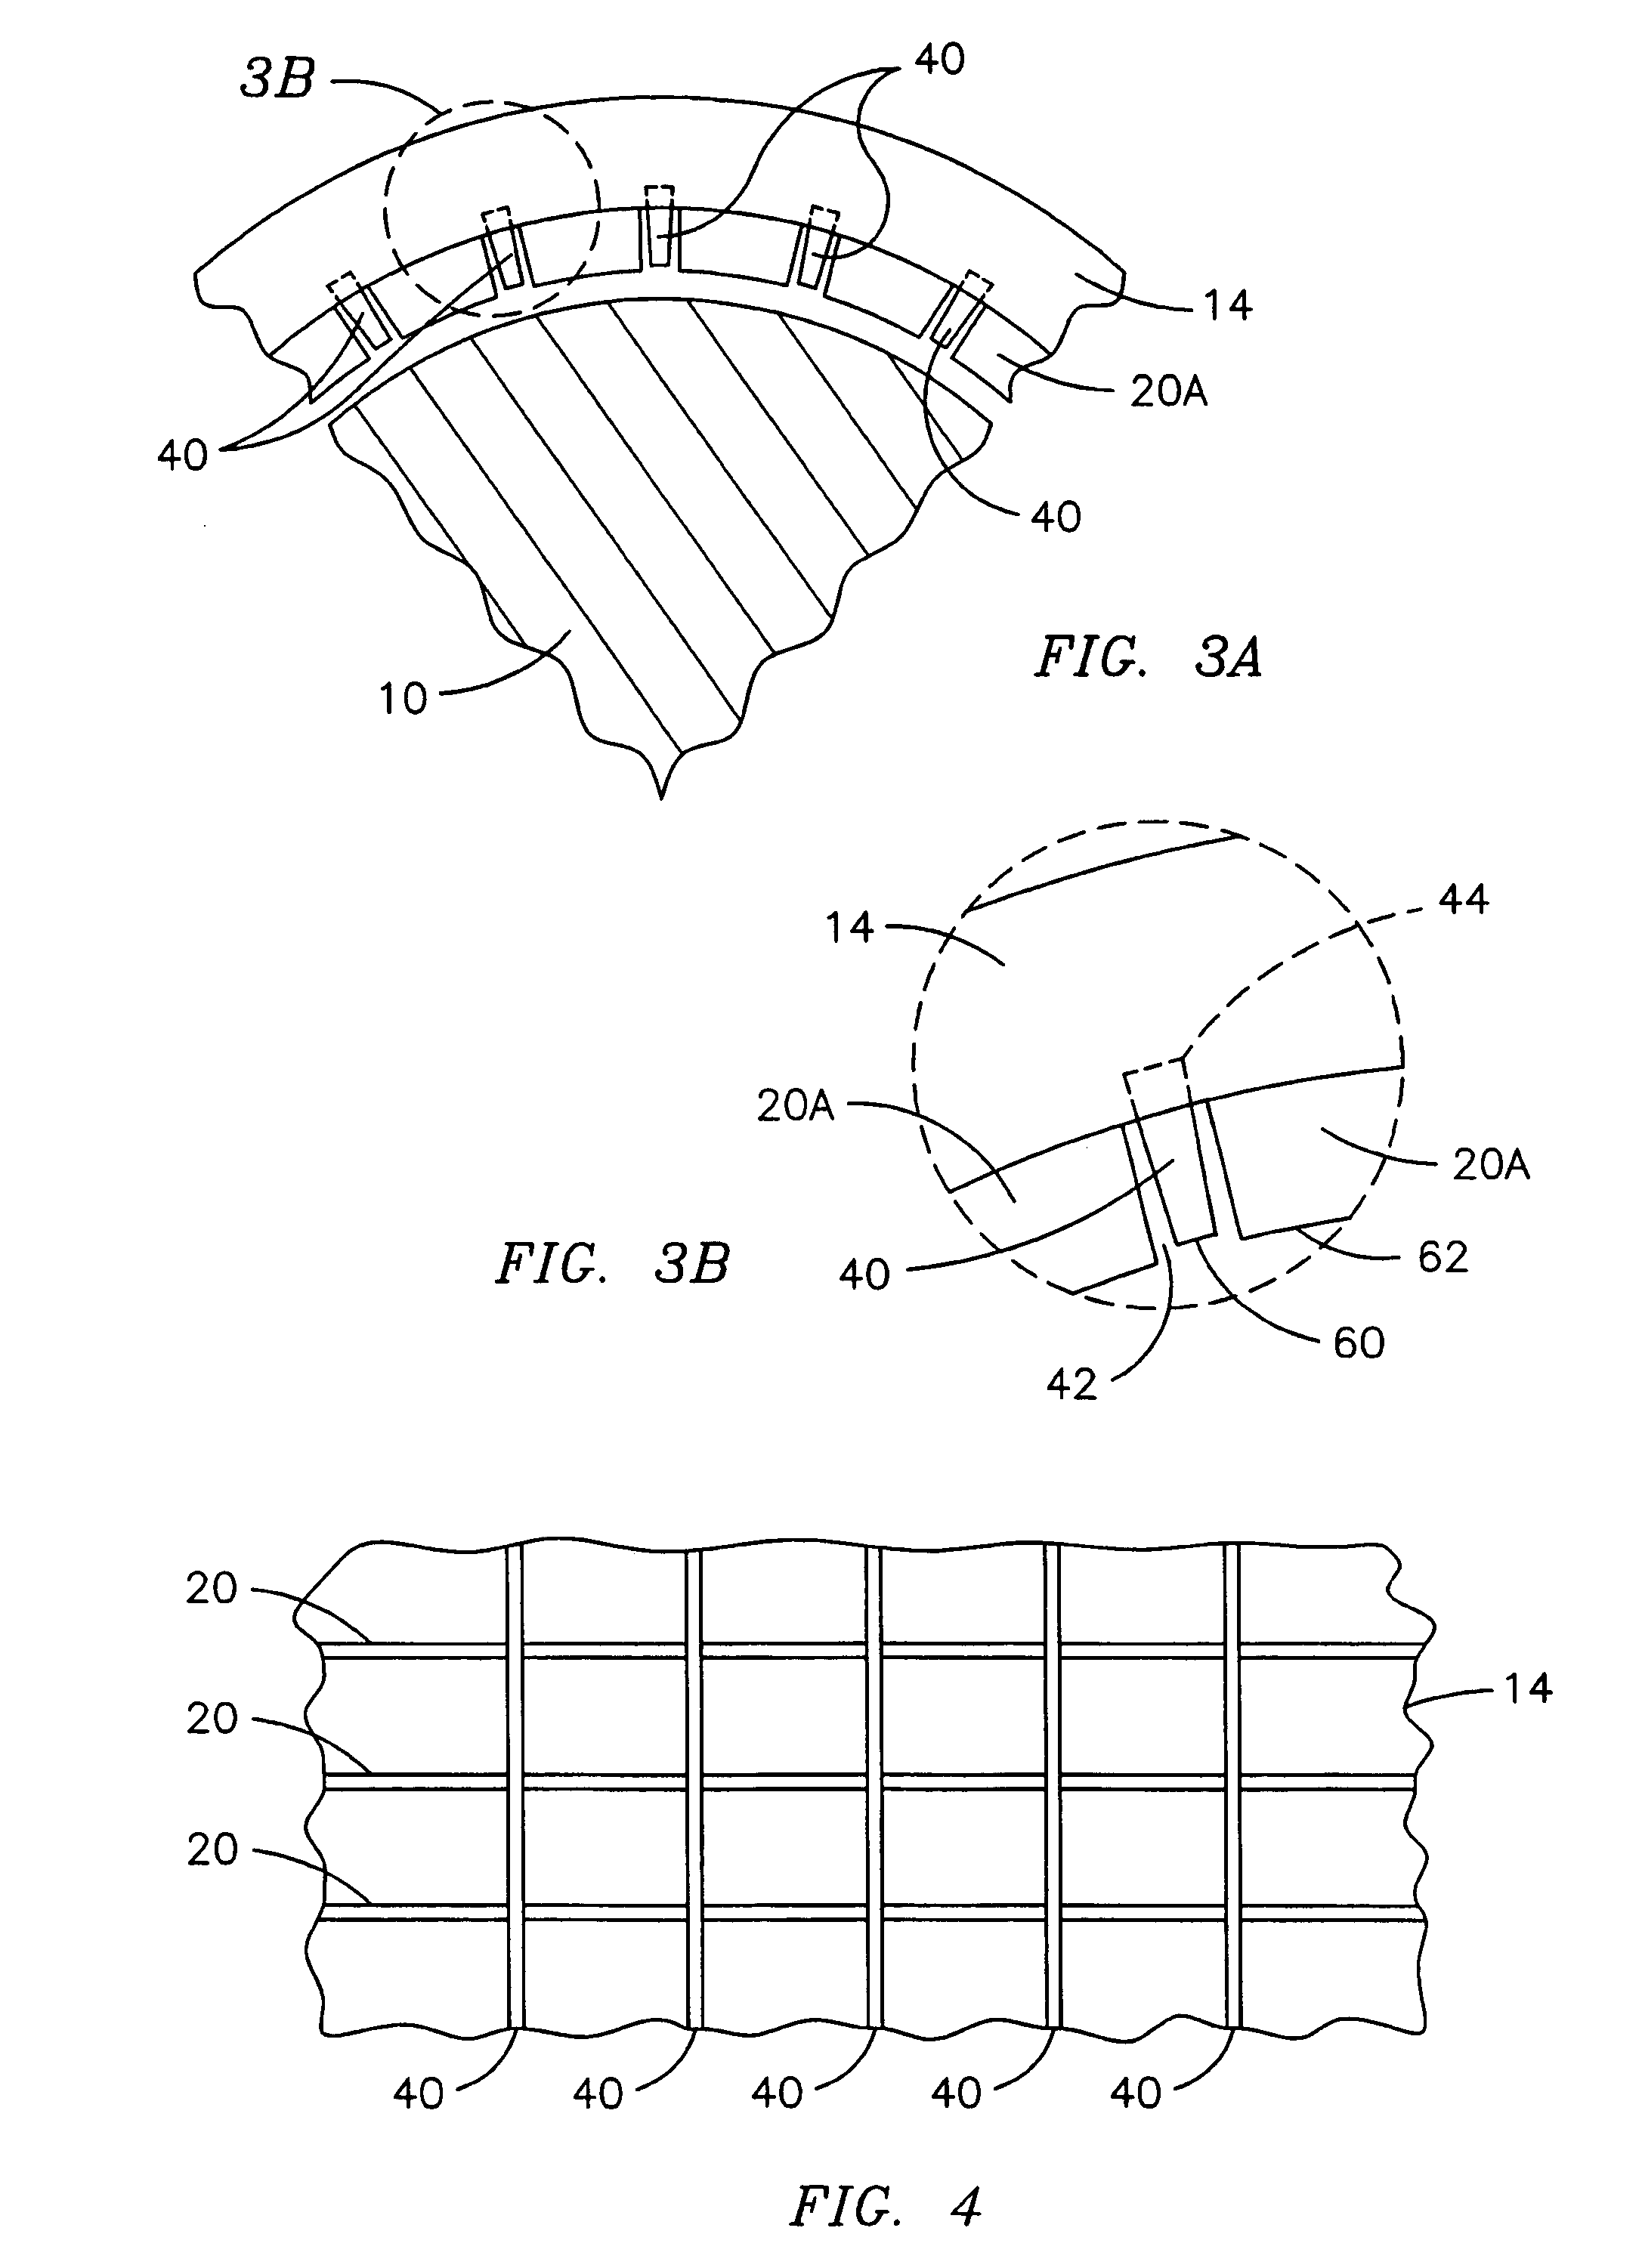 Flow dam design for labyrinth seals to promote rotor stability